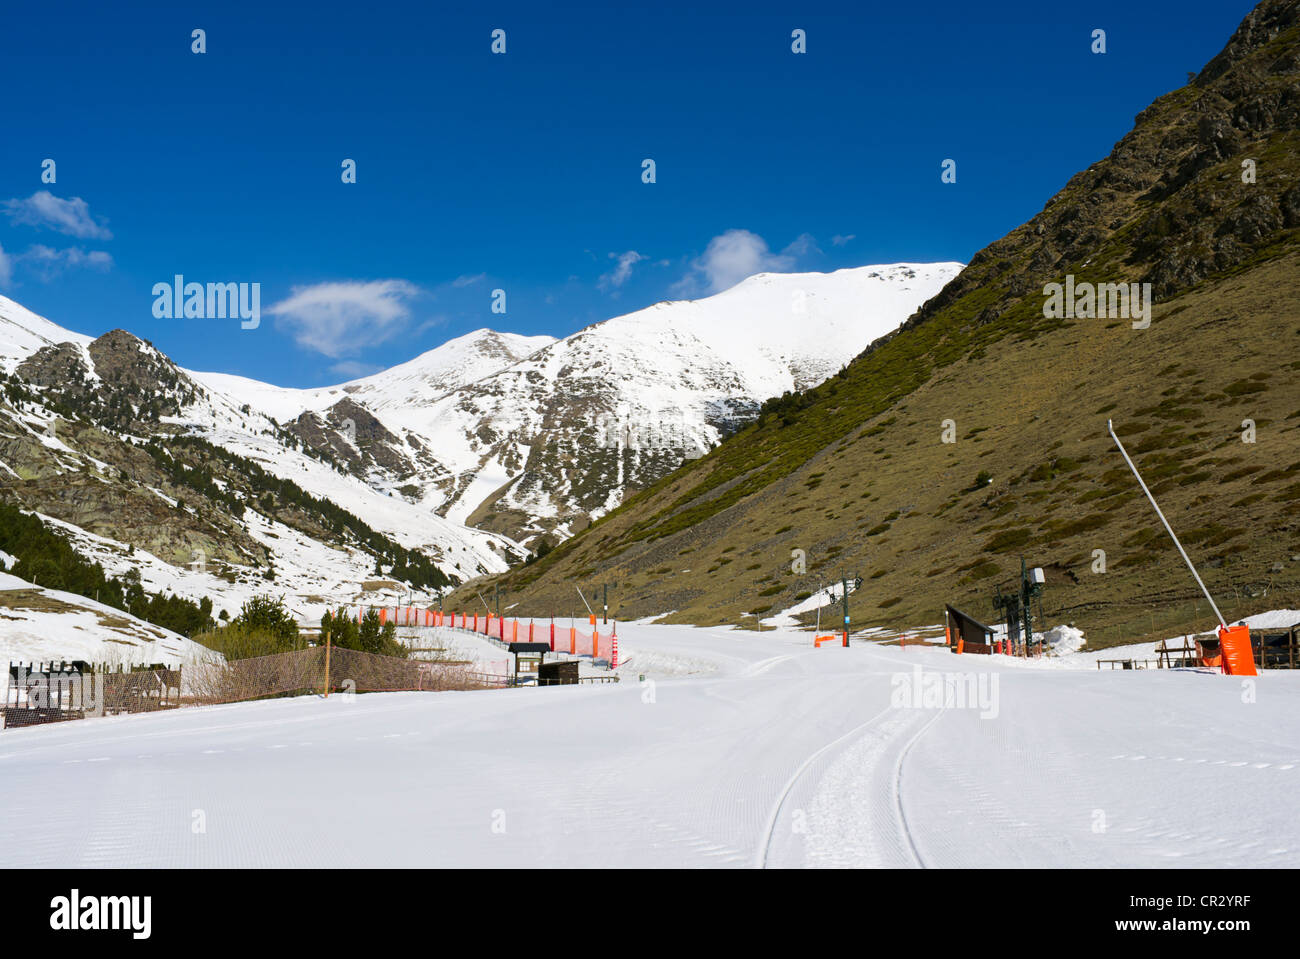 Groomed pistes in the Vall de Núria valley, northern Catalonia, Spain, Europe Stock Photo